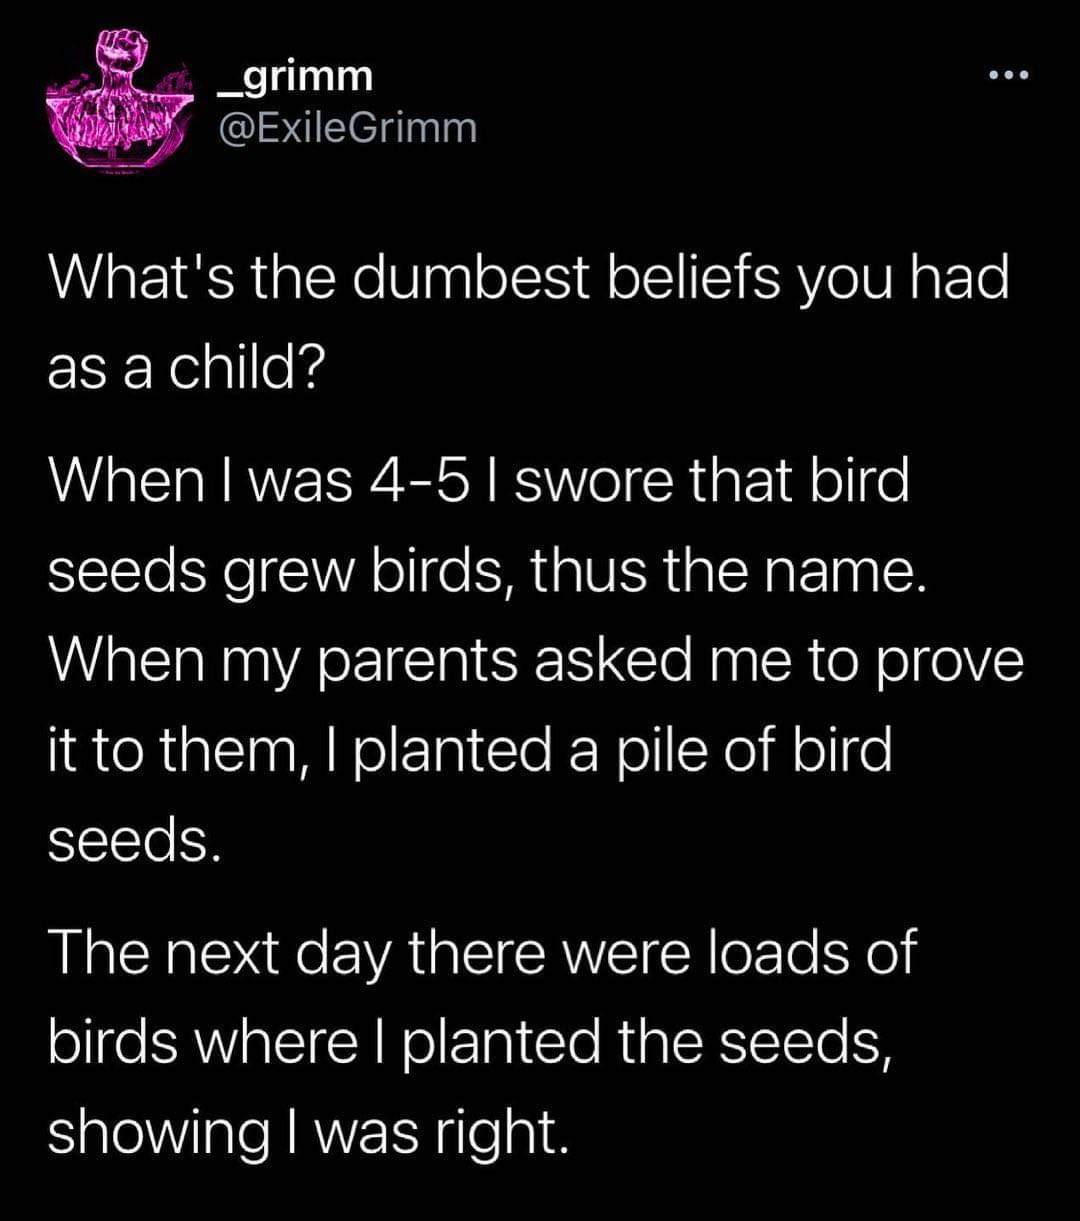 dank memes - Meme - _grimm Grimm What's the dumbest beliefs you had as a child? When I was 45 I swore that bird seeds grew birds, thus the name. When my parents asked me to prove it to them, I planted a pile of bird seeds. The next day there were loads of